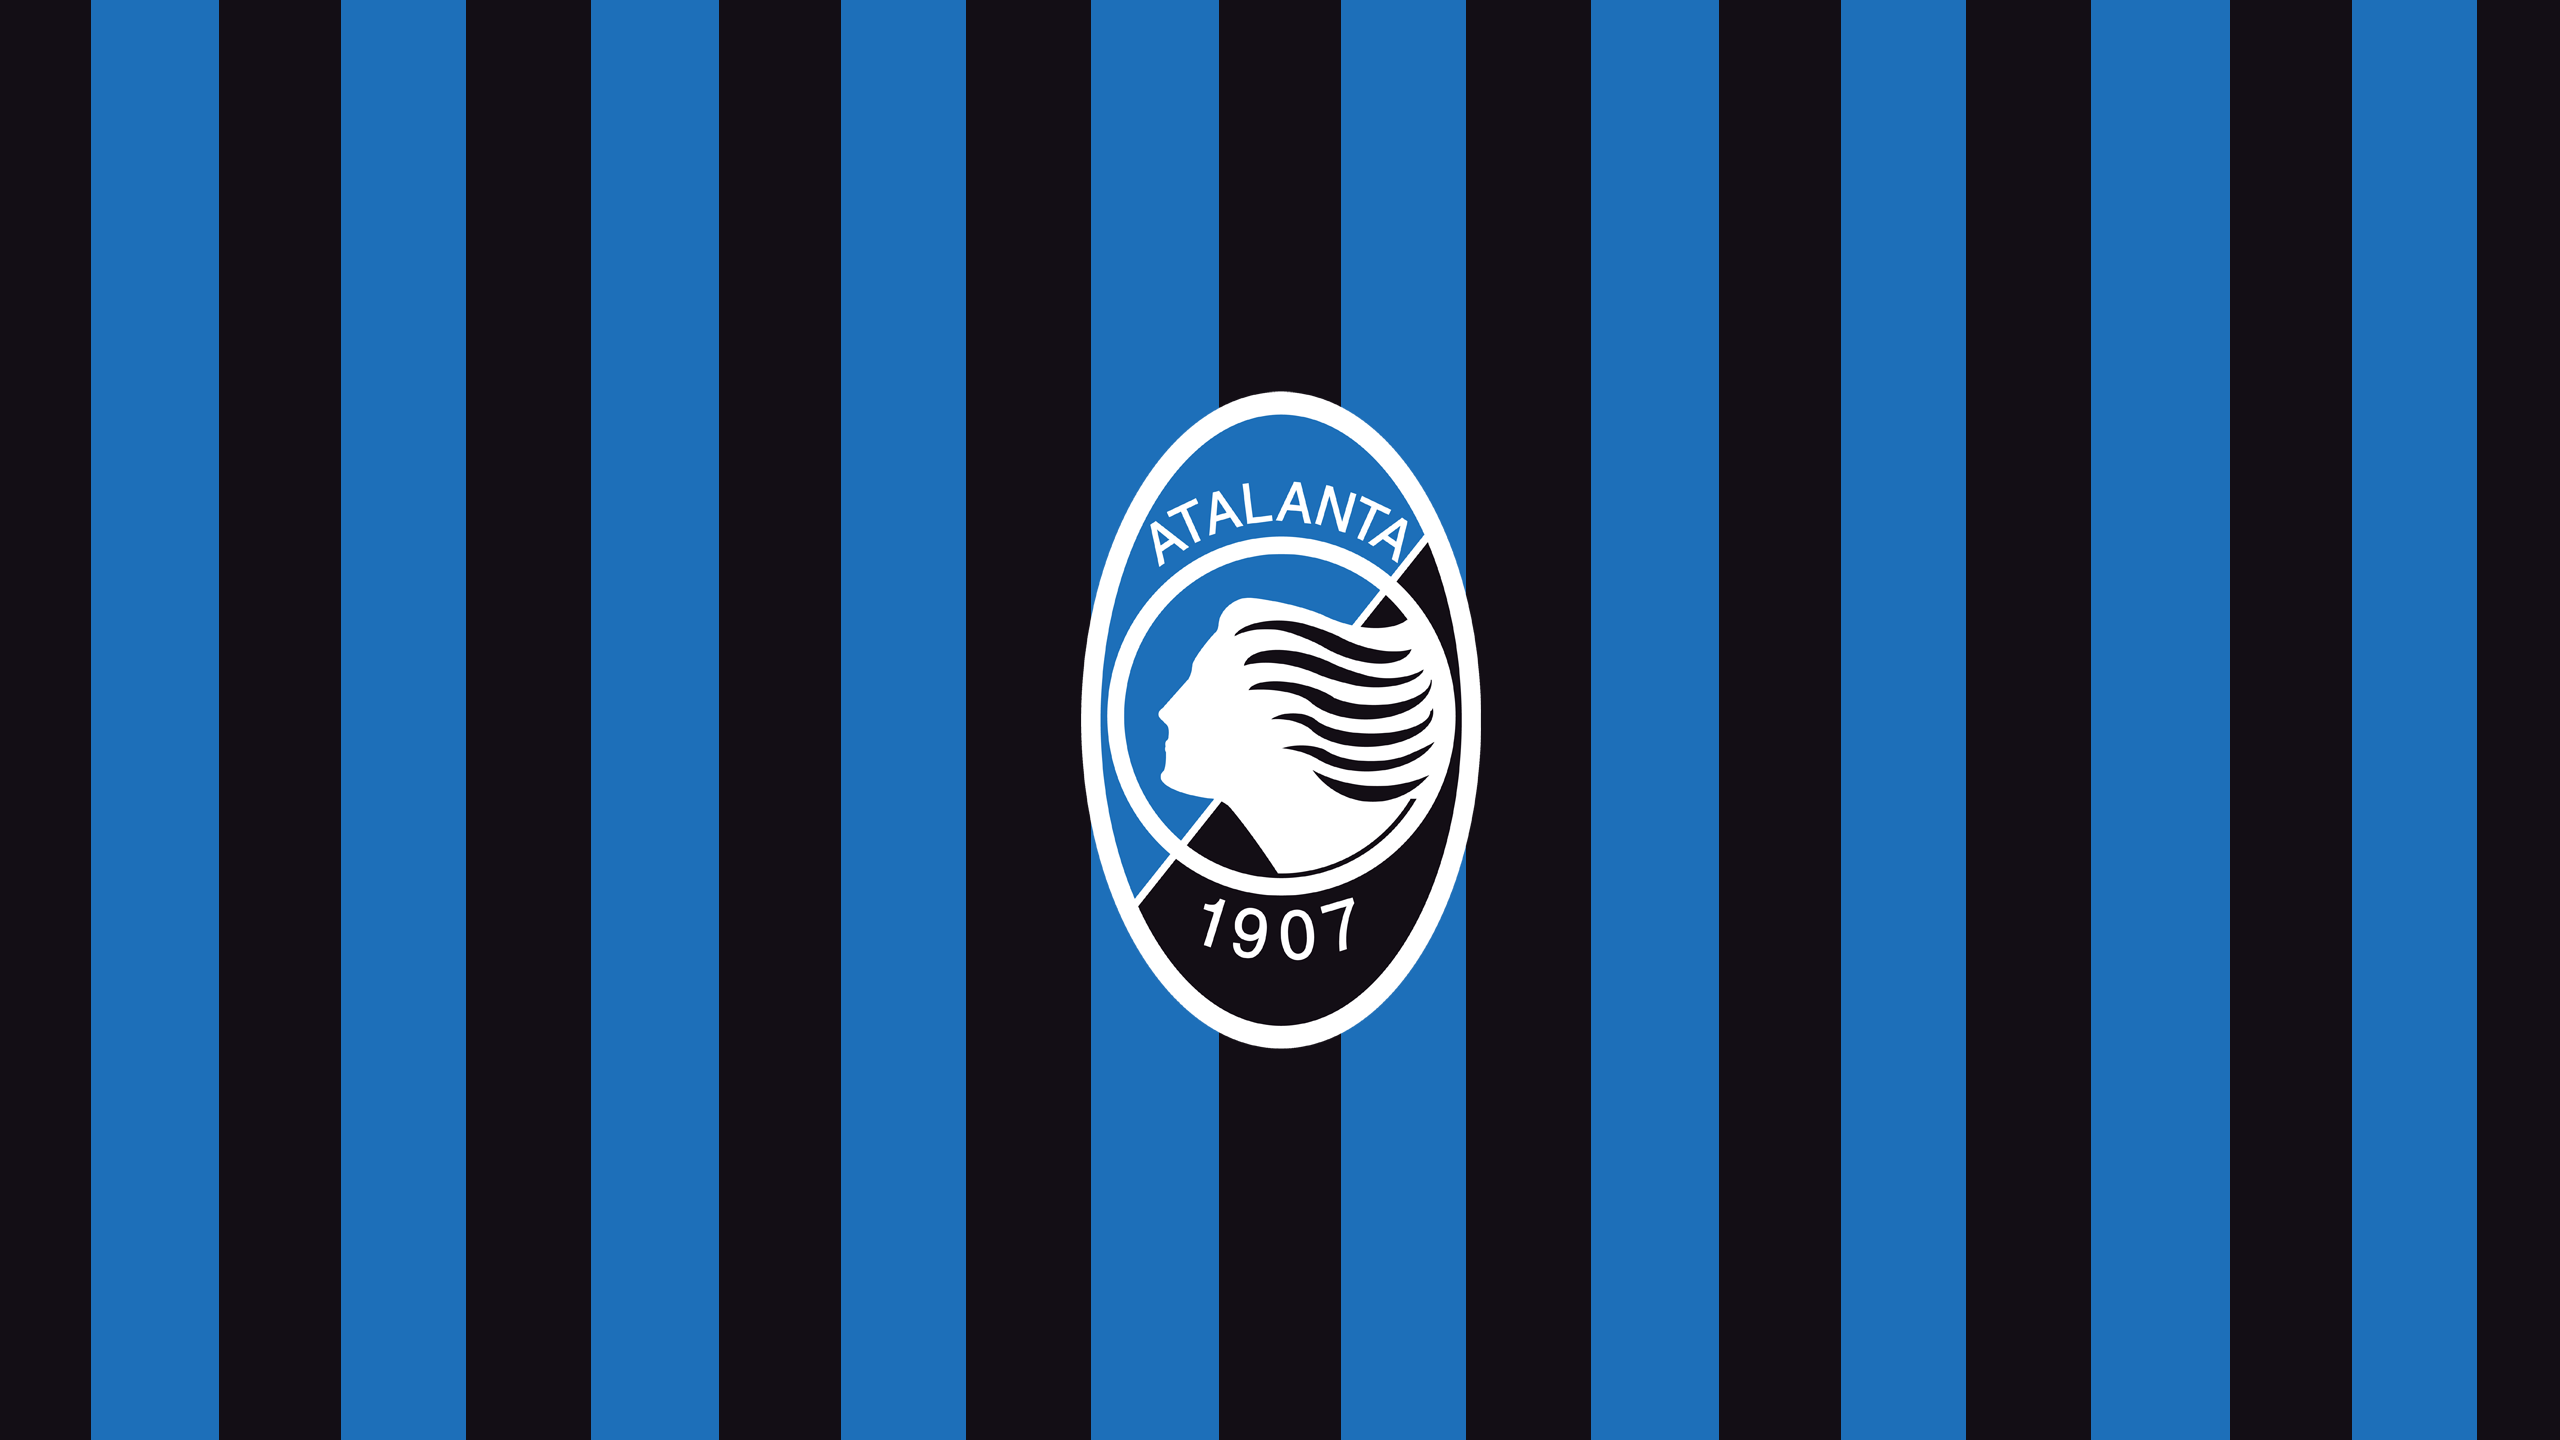 The arrival of Touré from Almeria and the departure of Hojlund to Manchester United marks the most trendsetting transfer window for Atalanta.